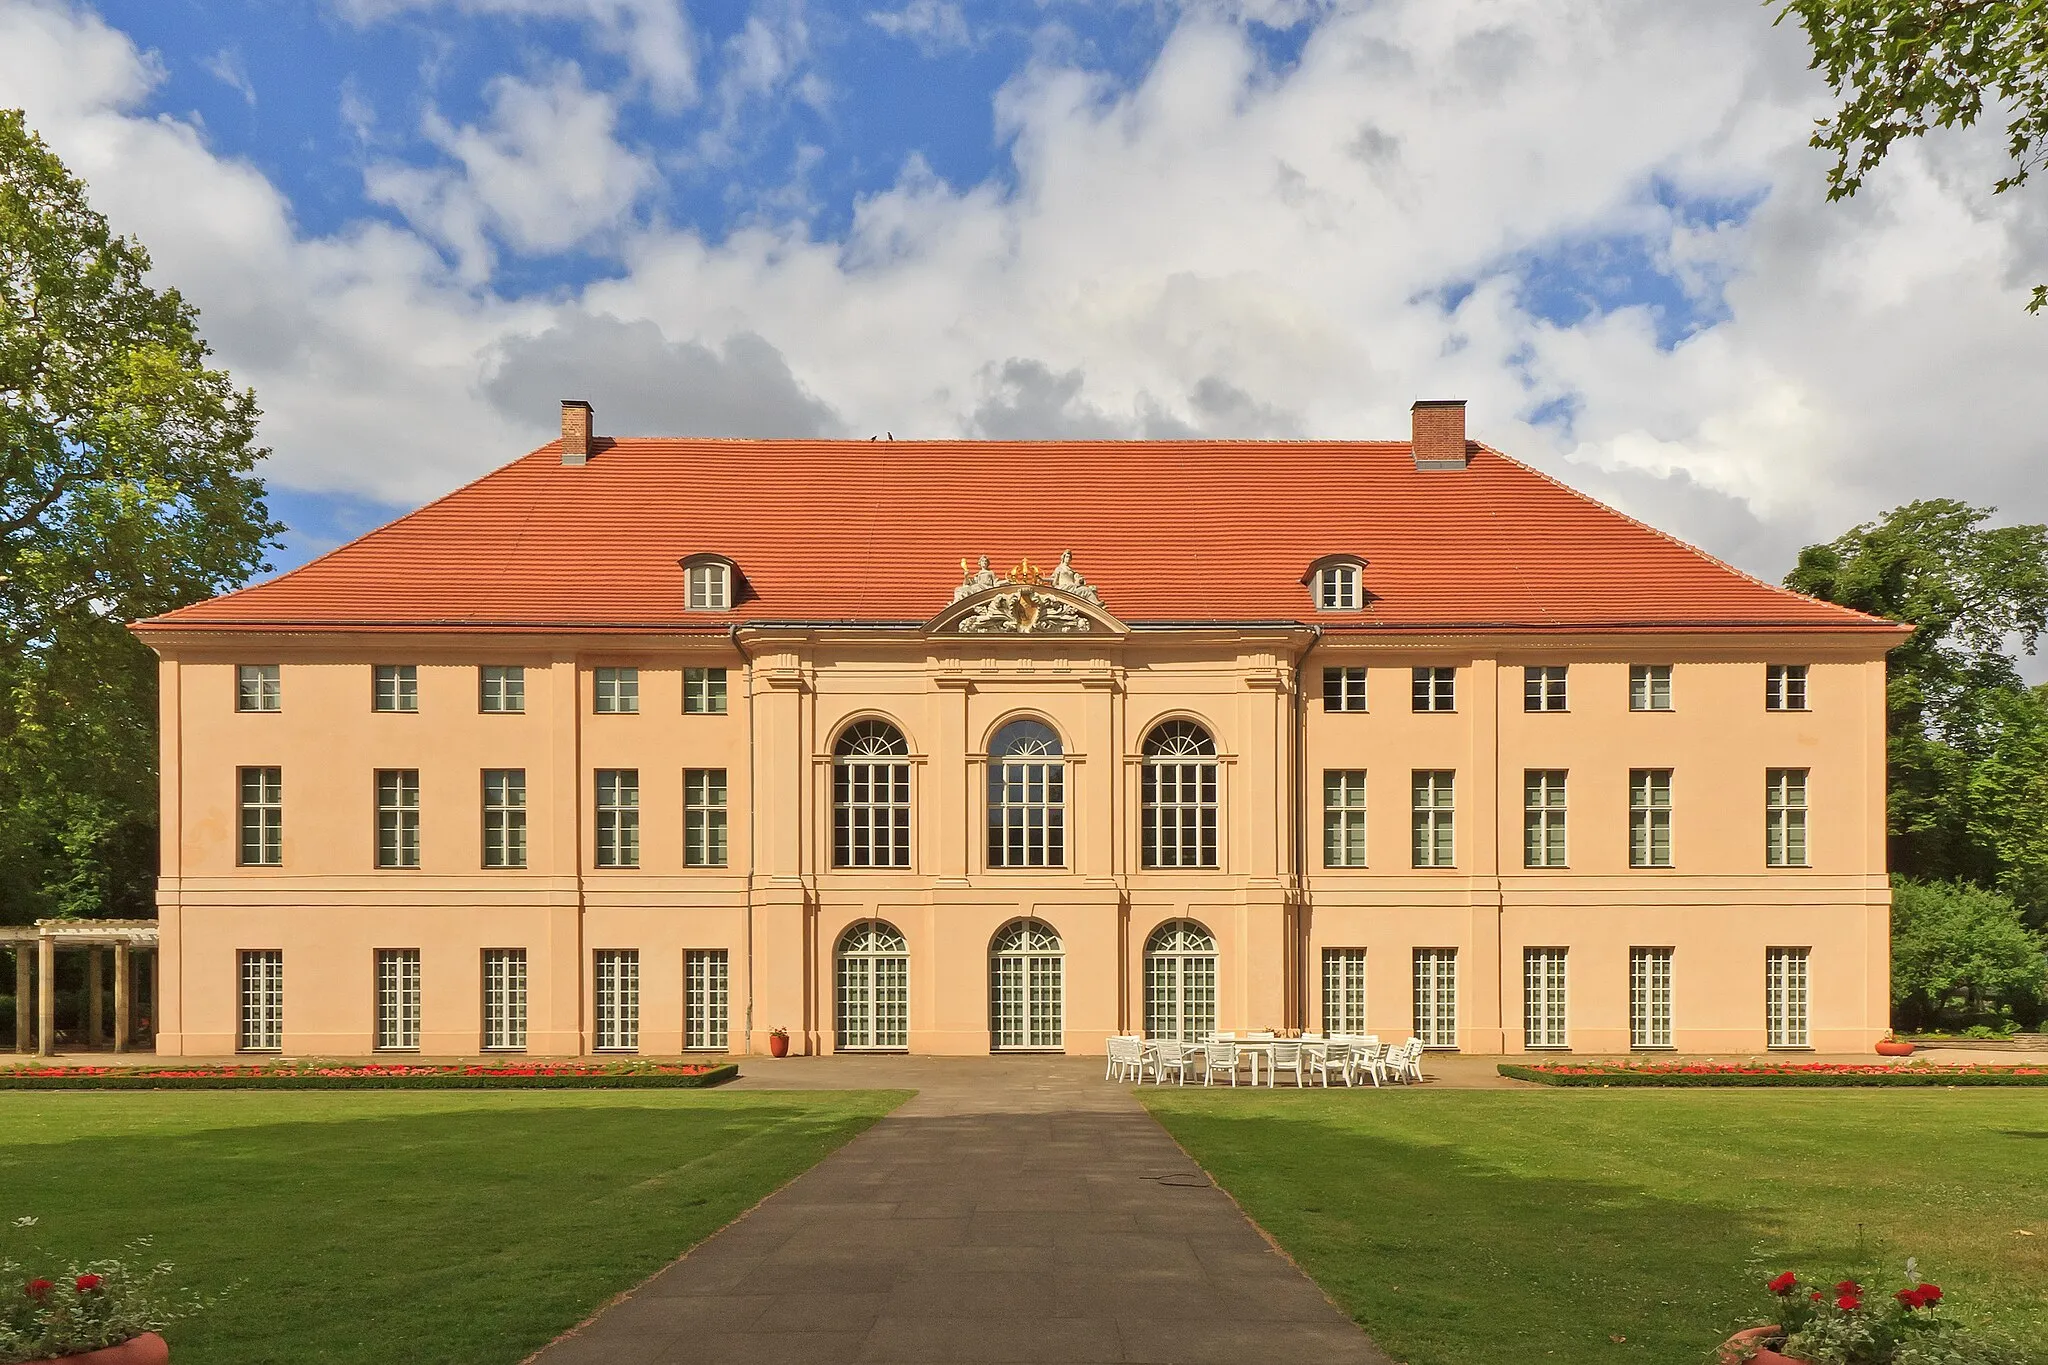 Photo showing: The Schönhausen Palace in Pankow borough, Berlin, Germany